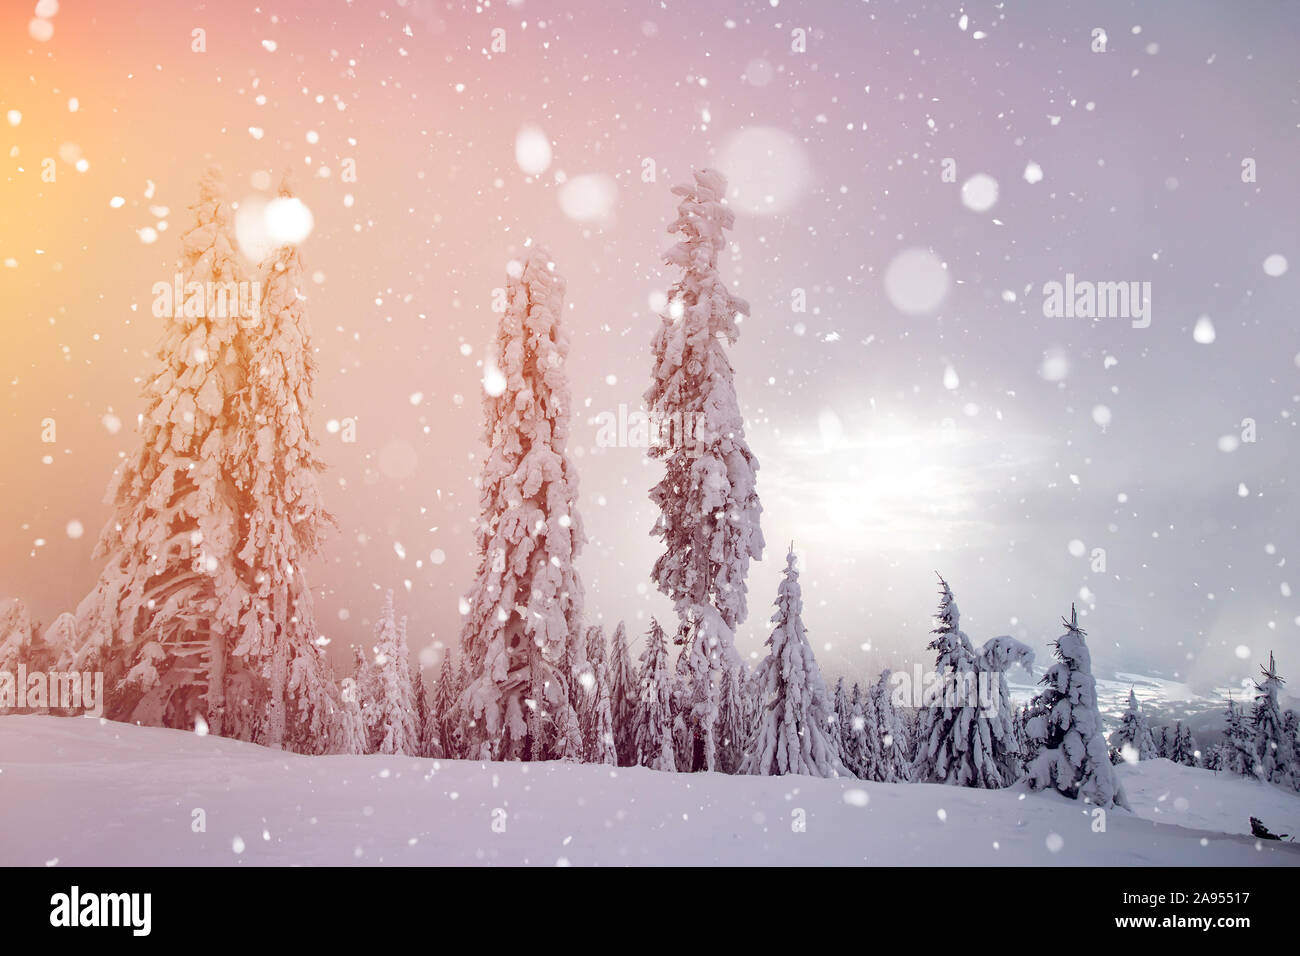 Magic Christmas concept with falling snow over beautiful winter landscape in the sunset. Stock Photo